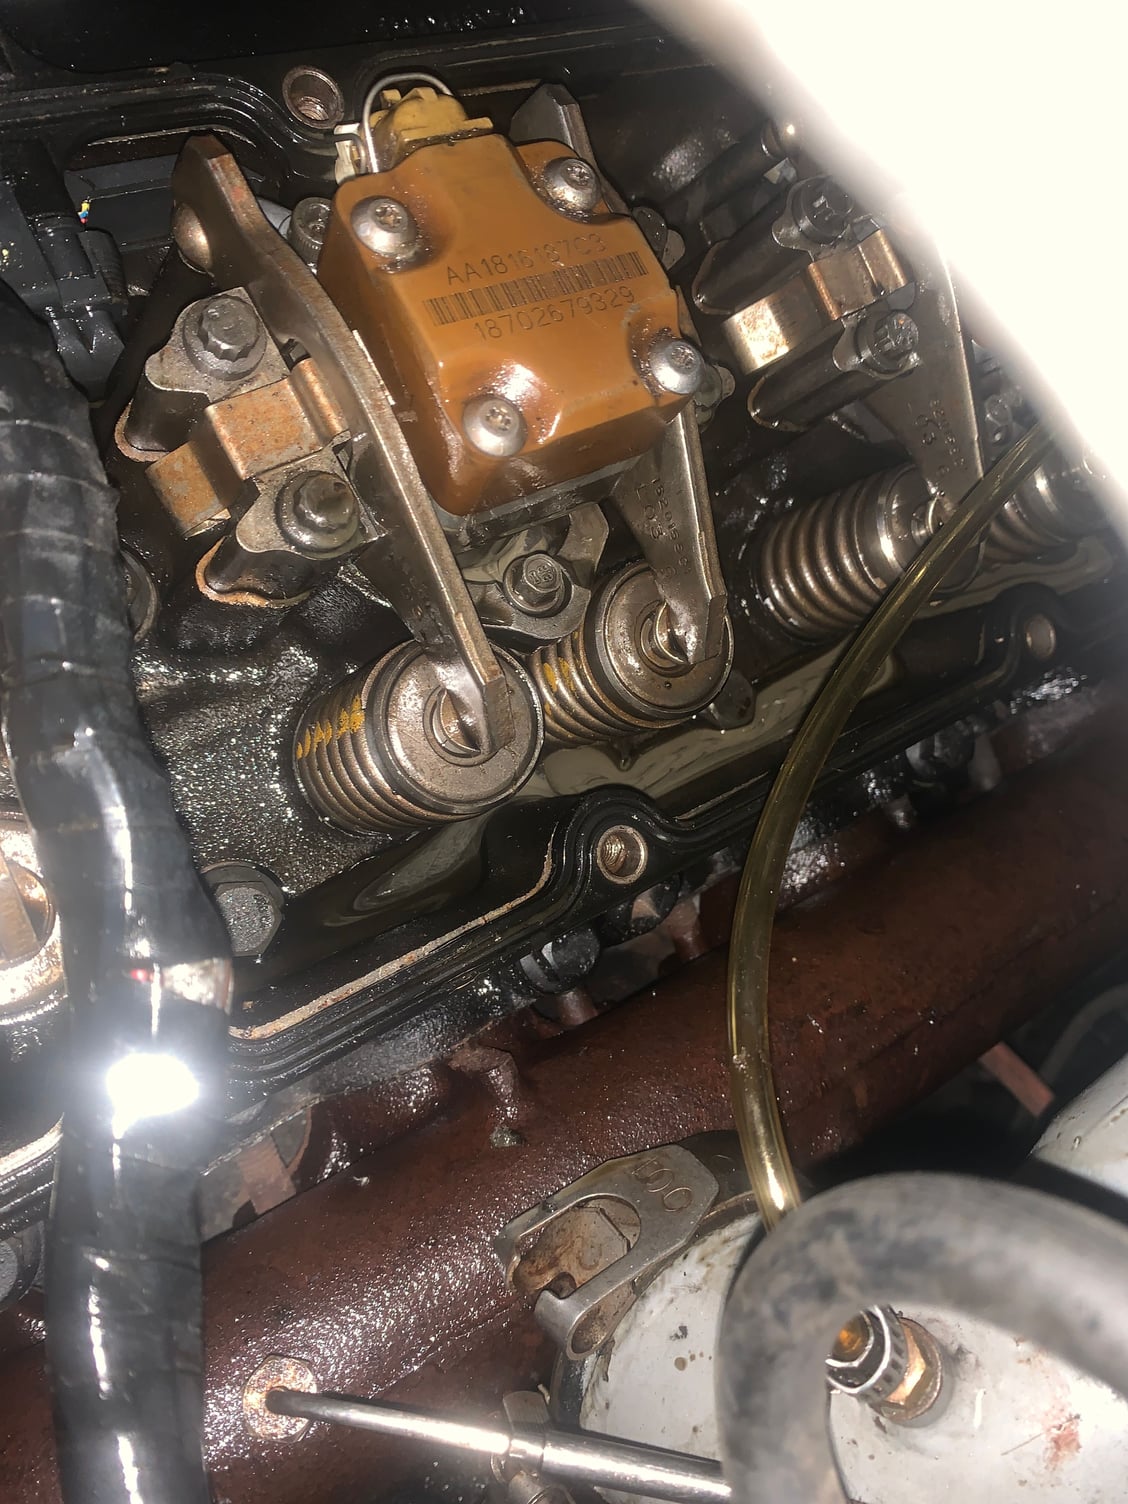 Last resort, asking for help, obs 7.3 zf5 no hpo flow Page 3 Ford